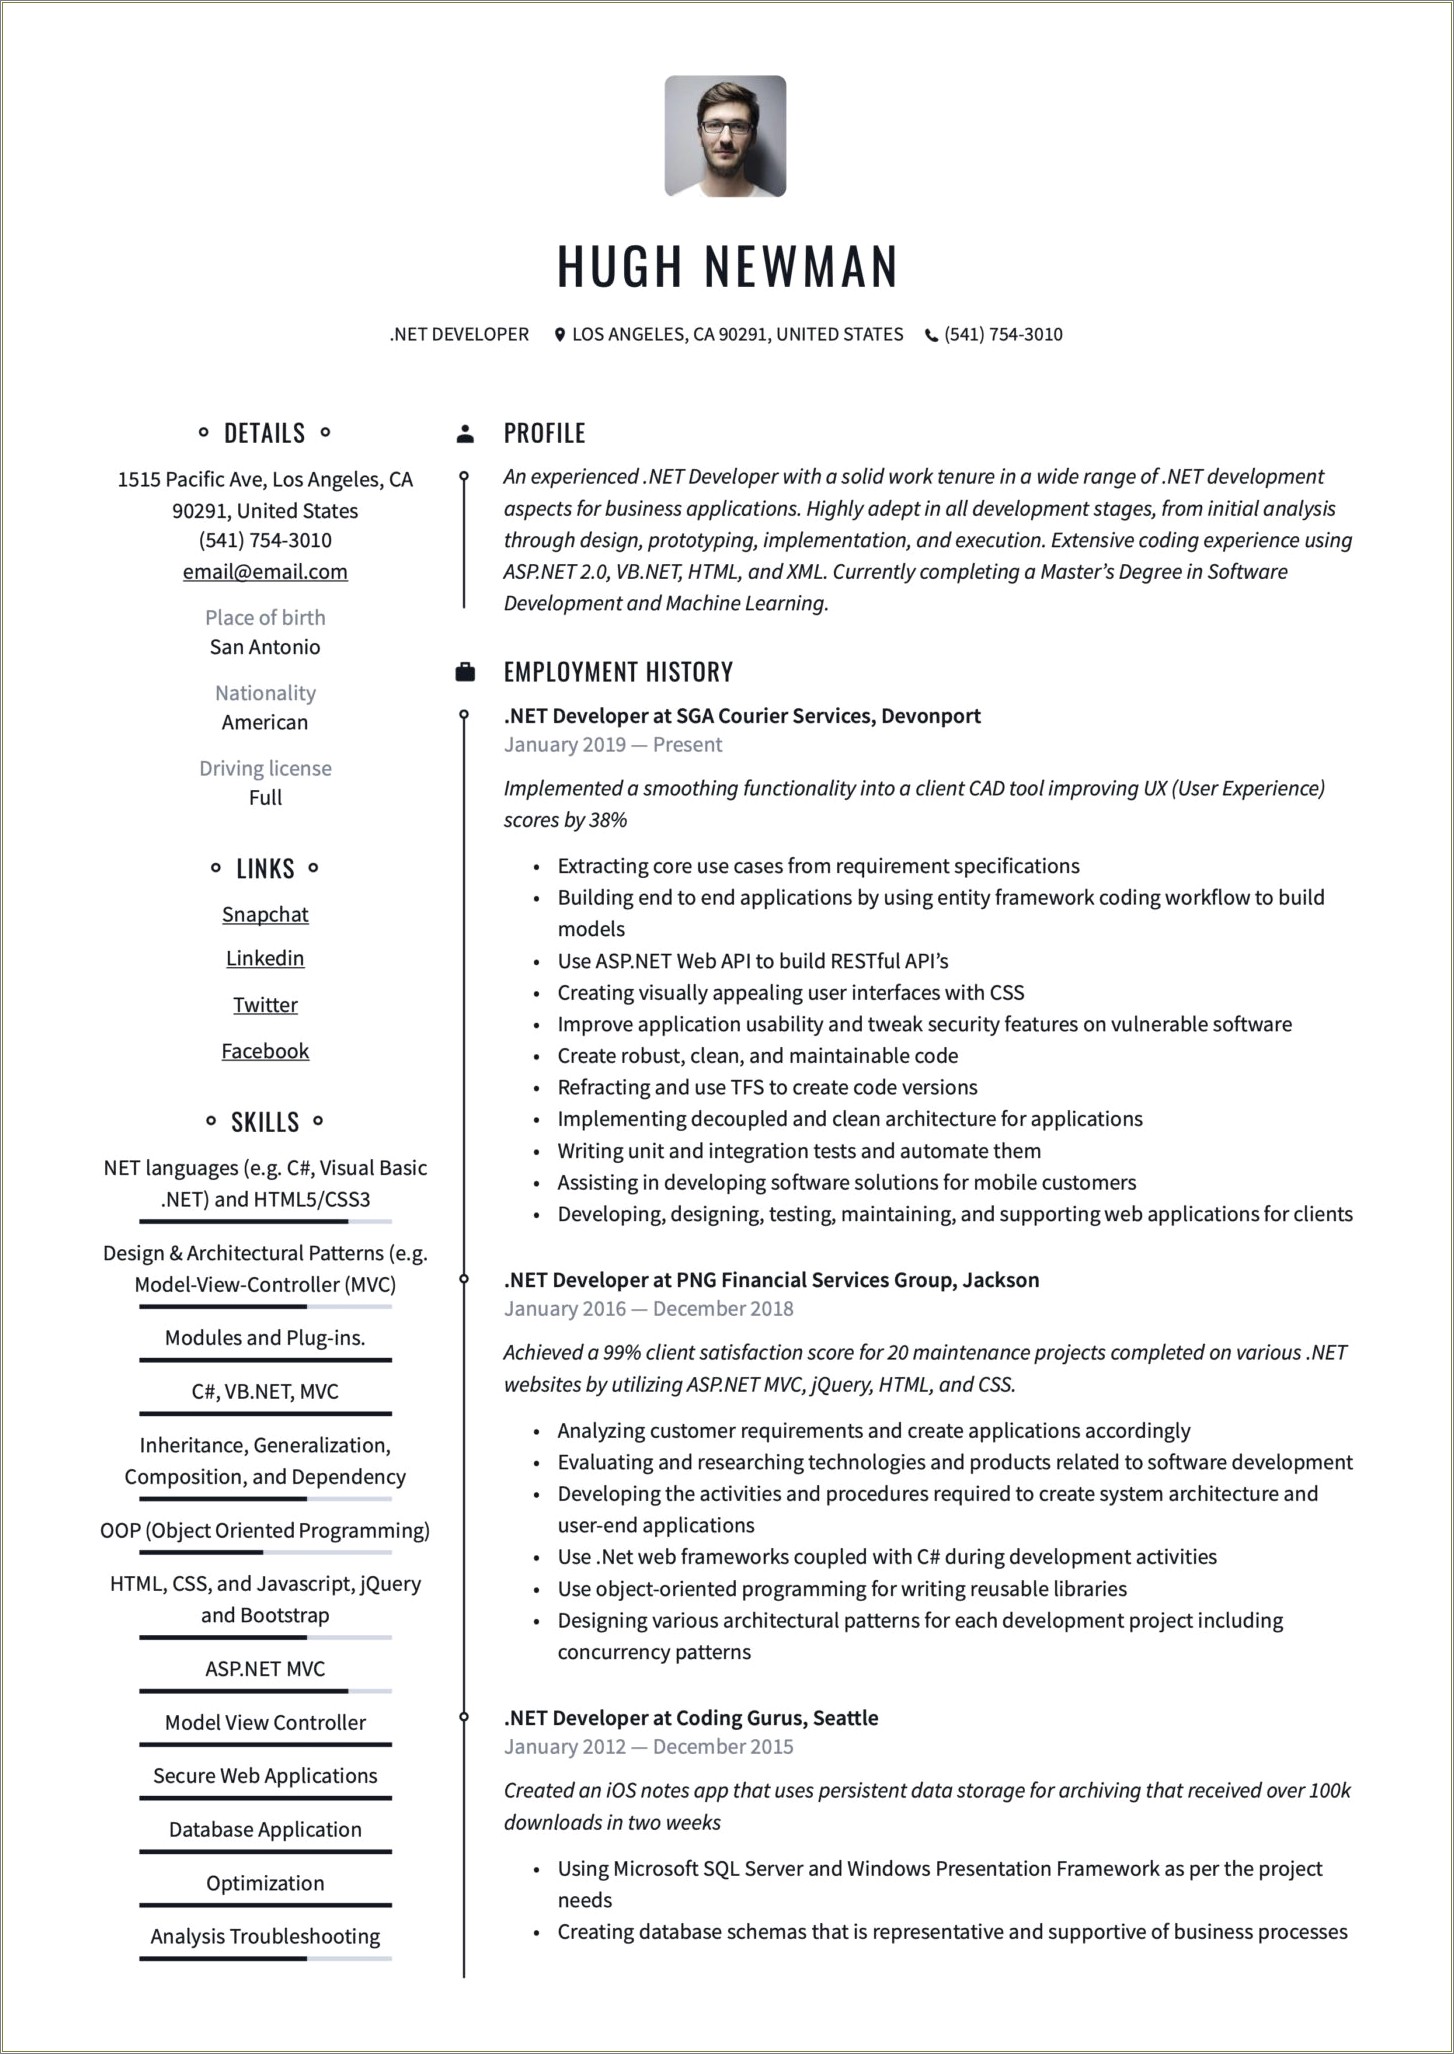 2 Years Experience Resume In Asp Net